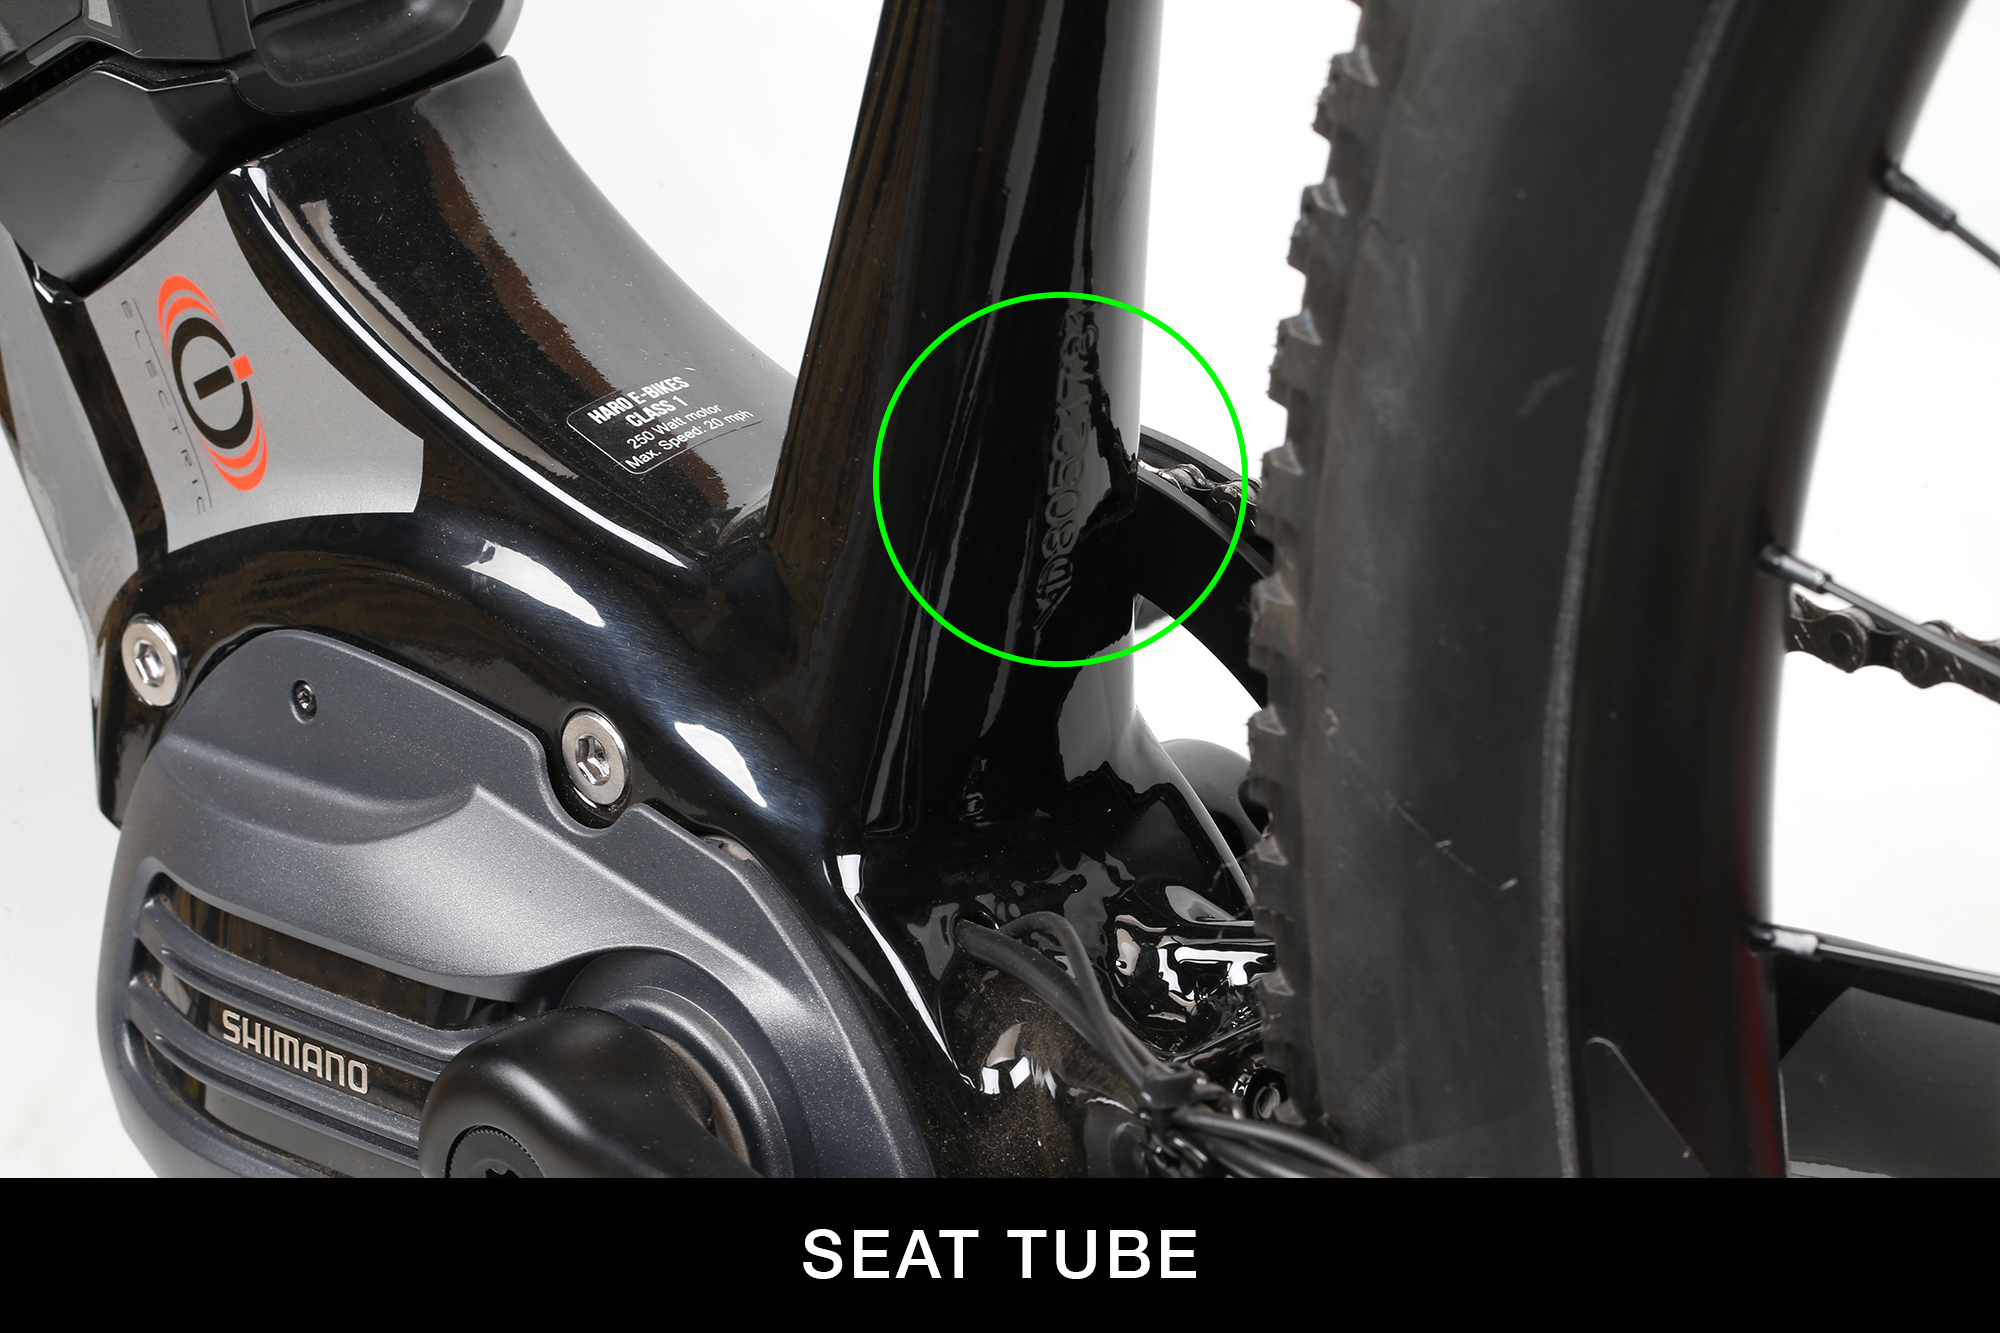 Serial location on seat tube